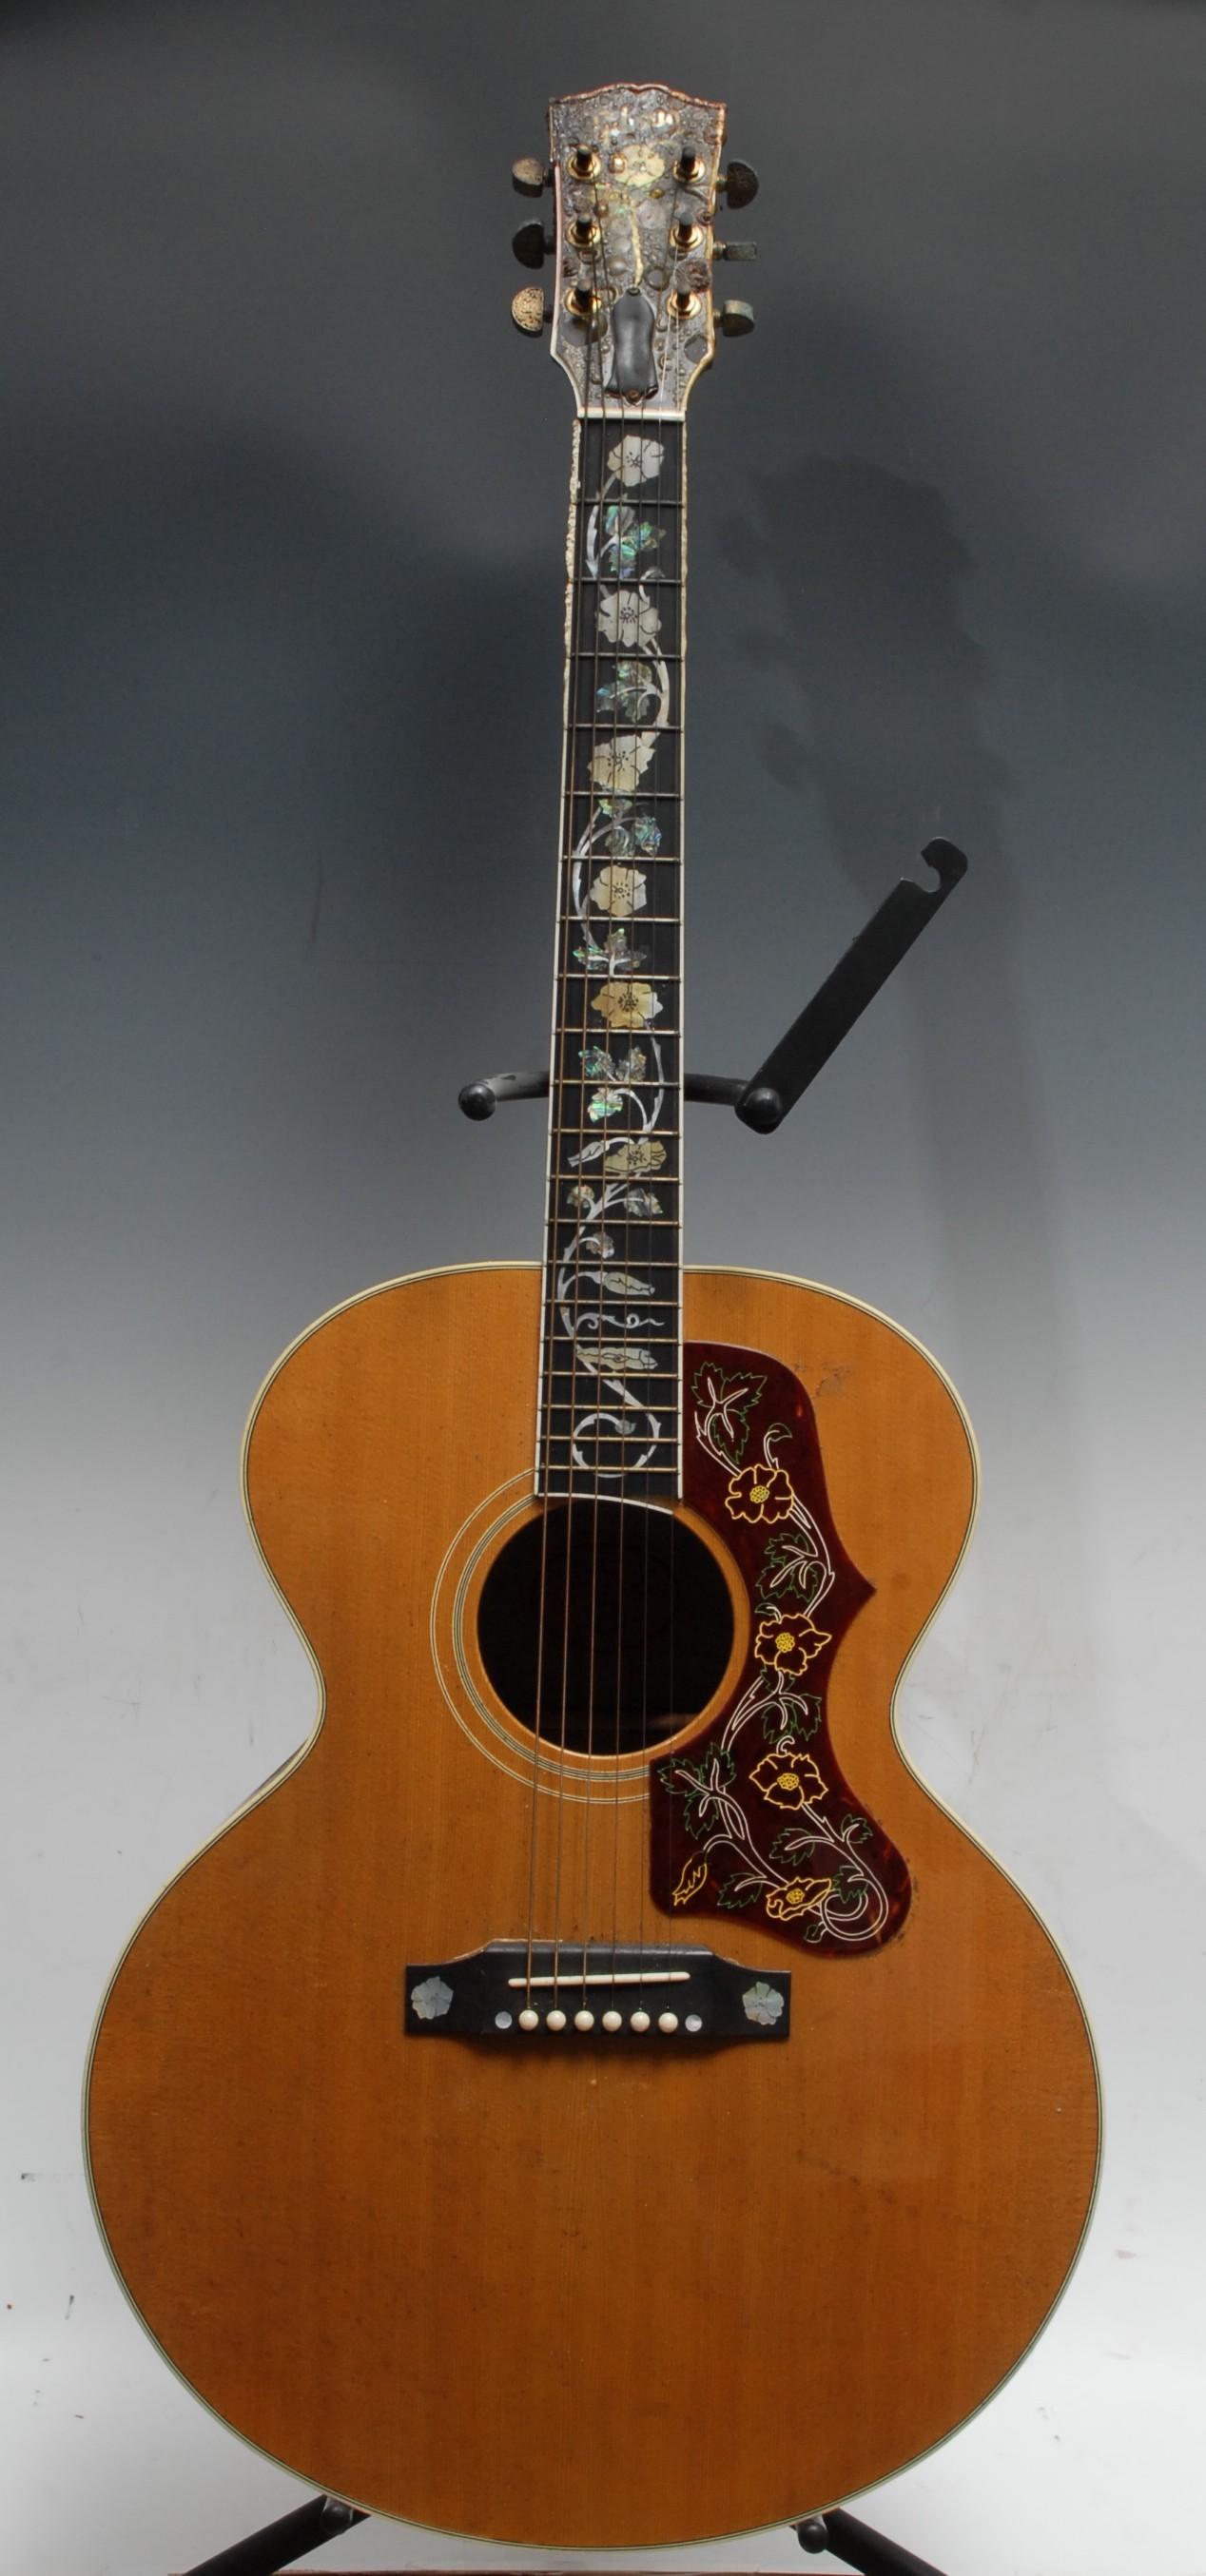 A Gibson J-185 Rose Vine Acoustic guitar, Bozeman, Montana USA, figured maple body back and sides,